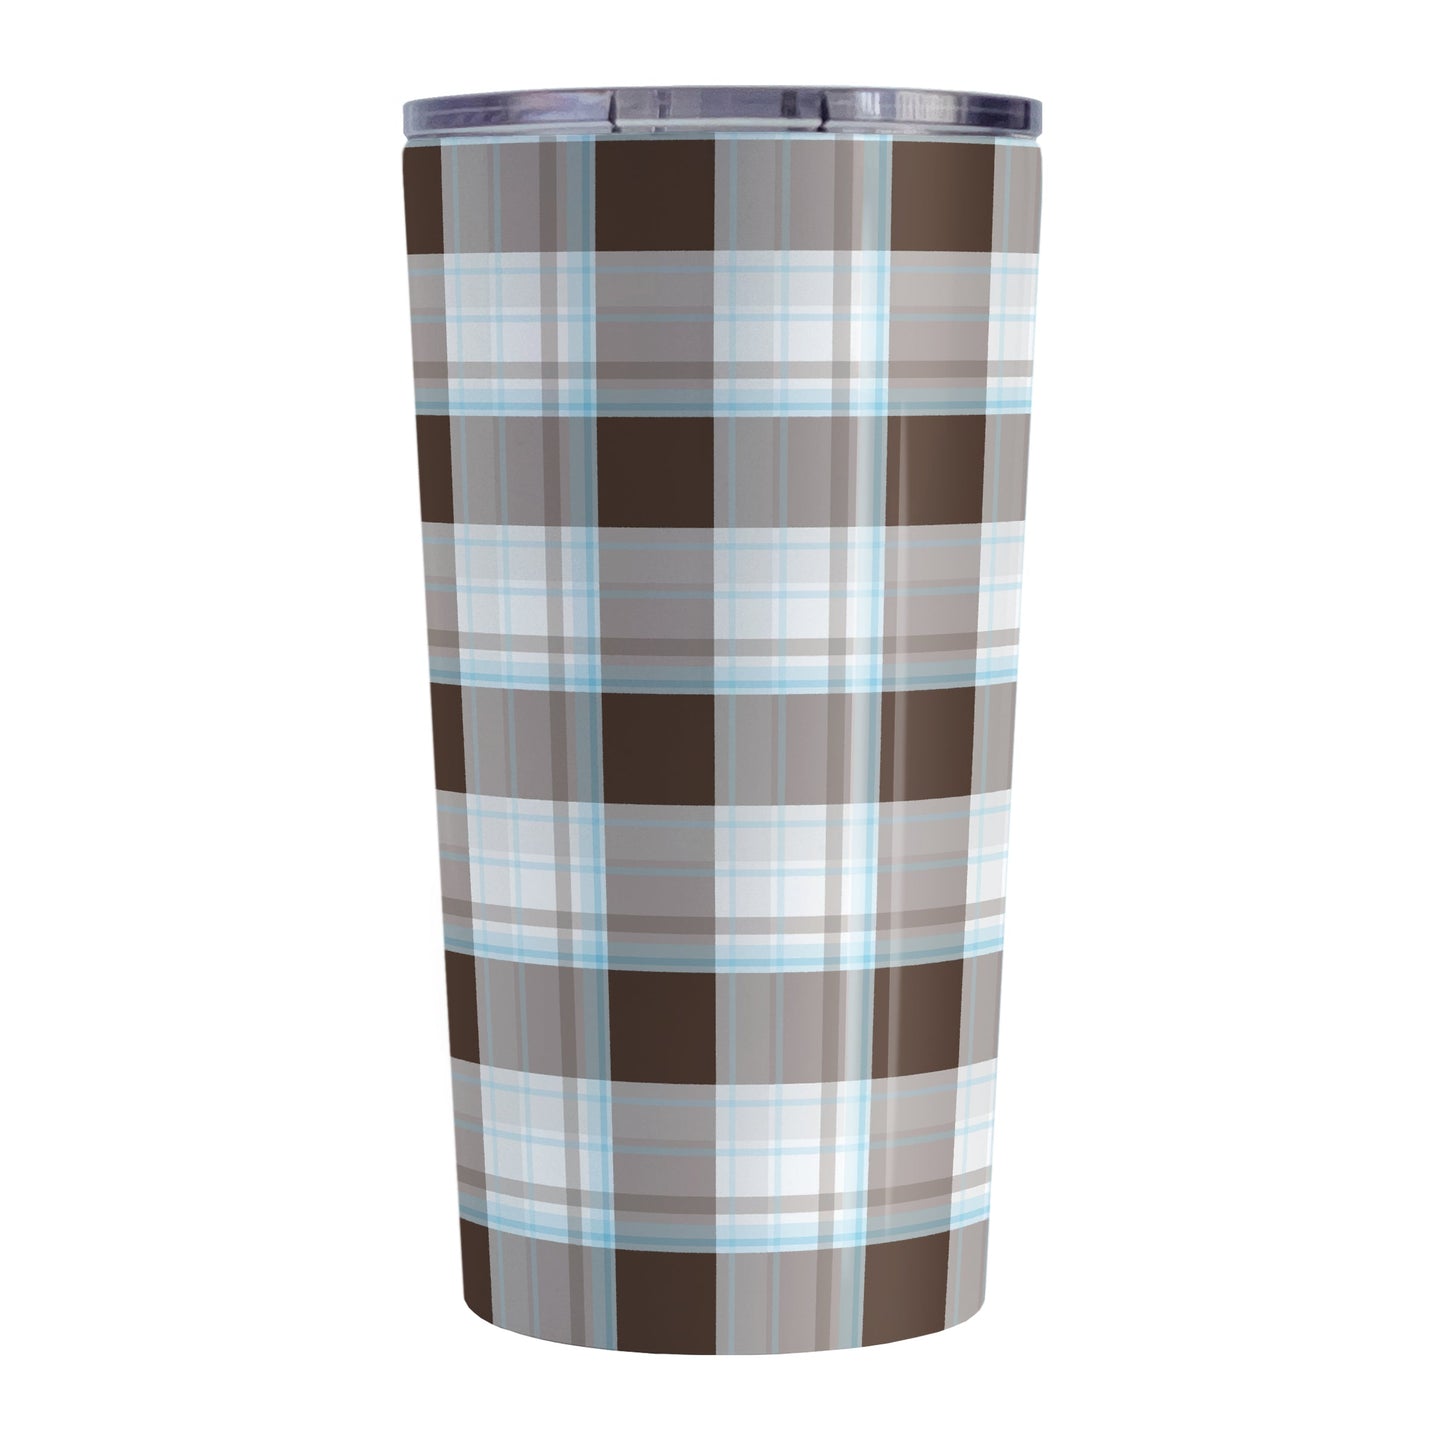 Brown Blue Plaid Tumbler Cup (20oz) at Amy's Coffee Mugs. A stainless steel insulated tumbler cup designed with a brown plaid pattern with blue accents that wraps around the cup. 